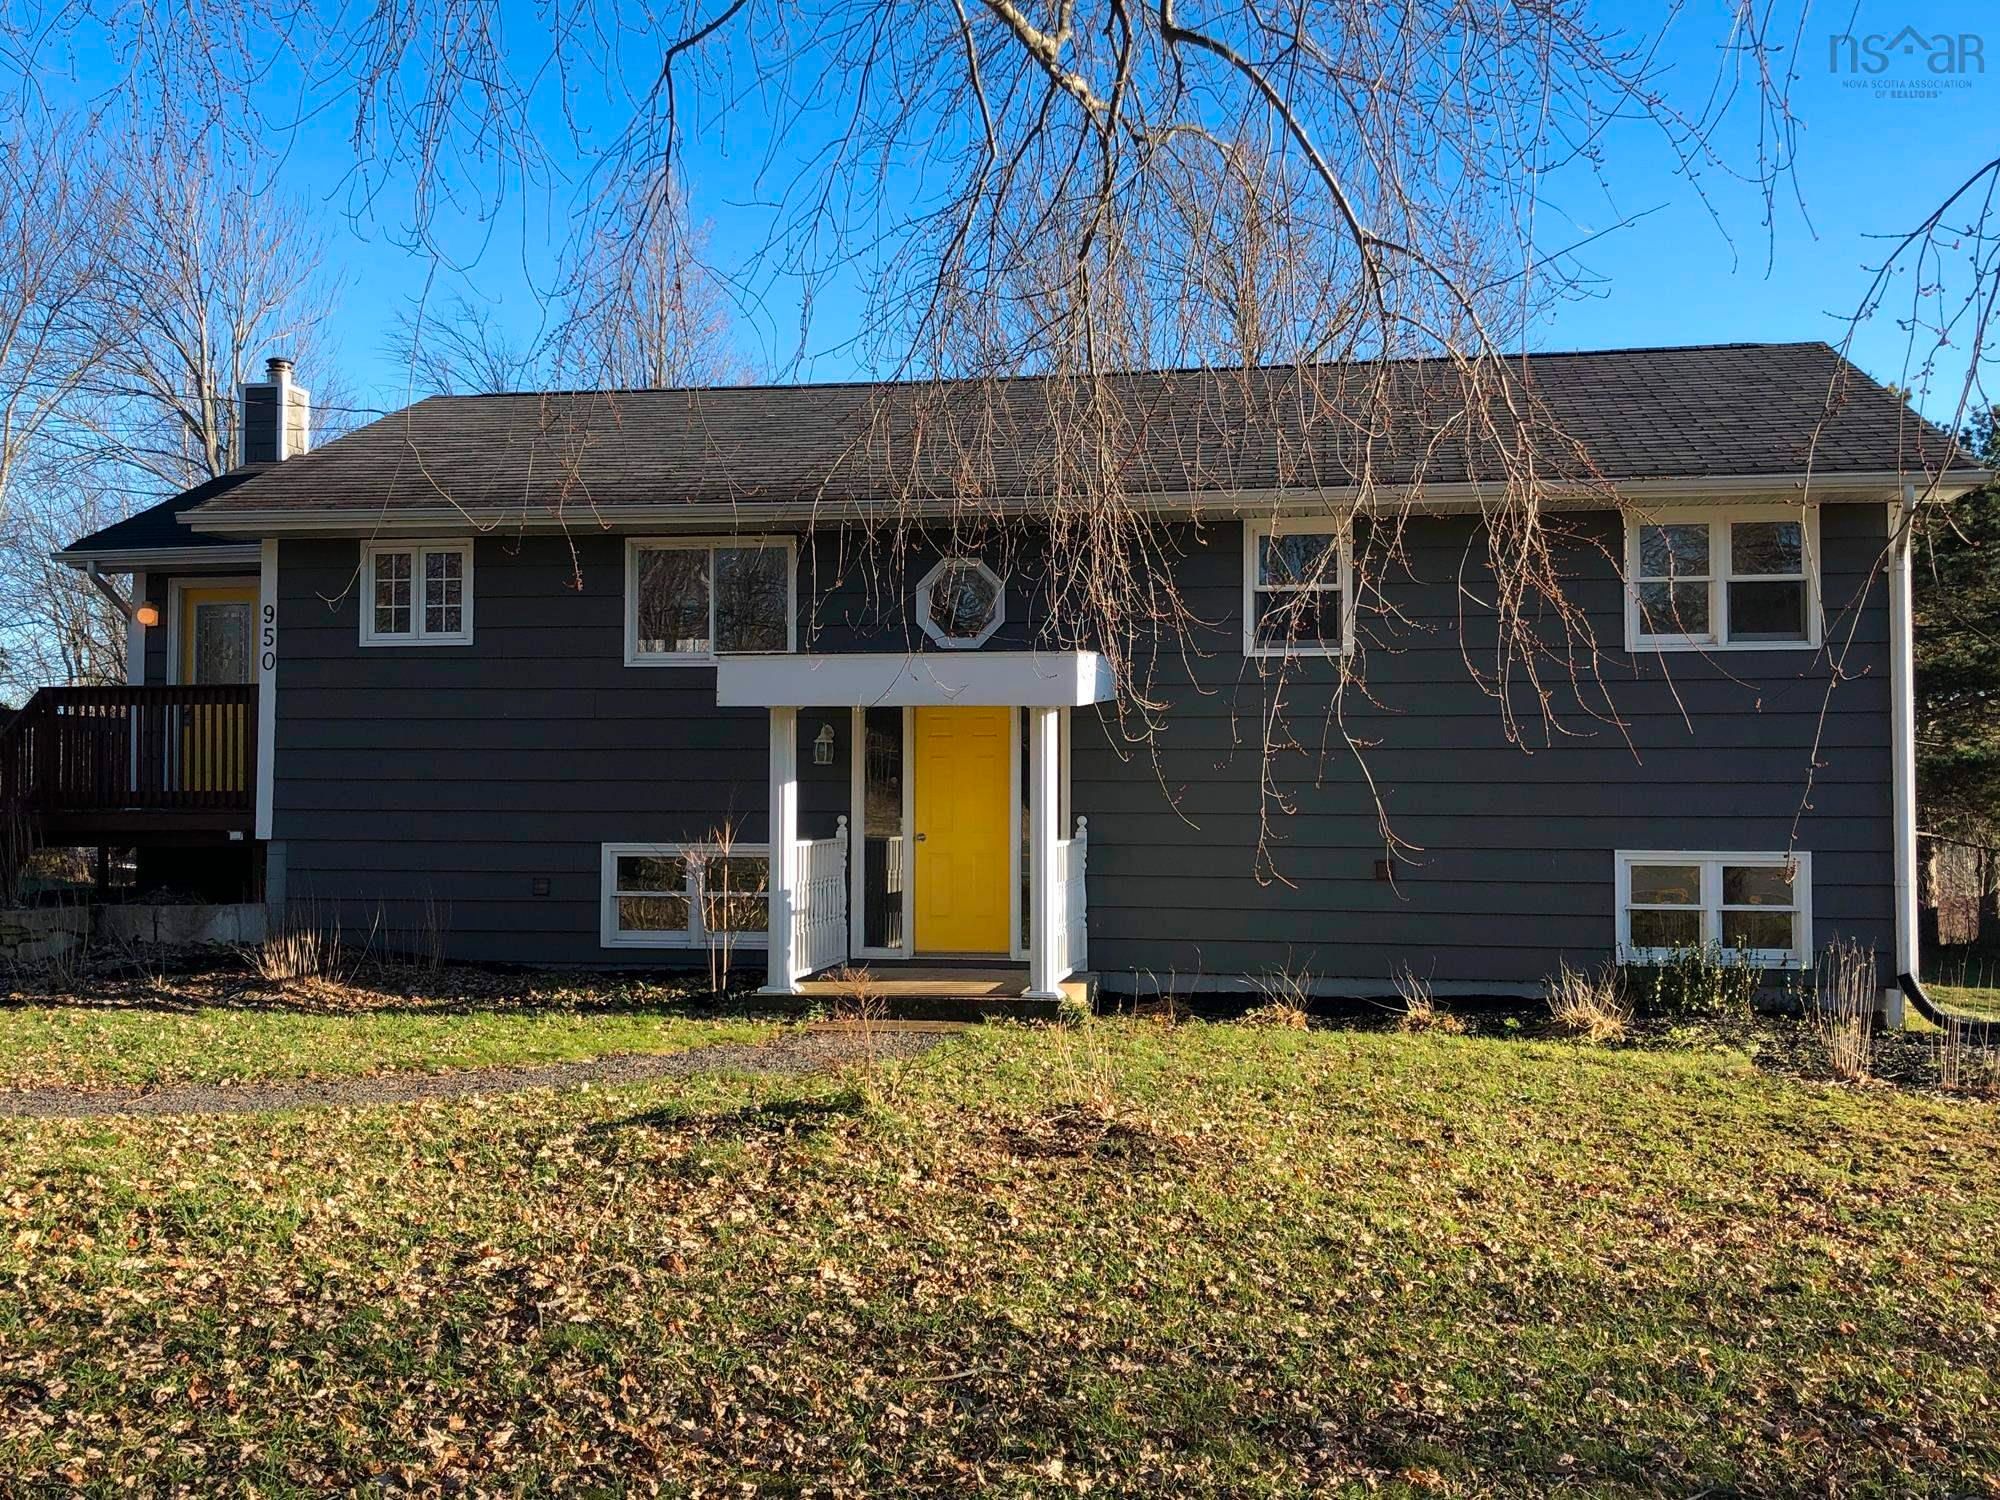 Main Photo: 950 Highway 341 in Upper Dyke: 404-Kings County Residential for sale (Annapolis Valley)  : MLS®# 202129521